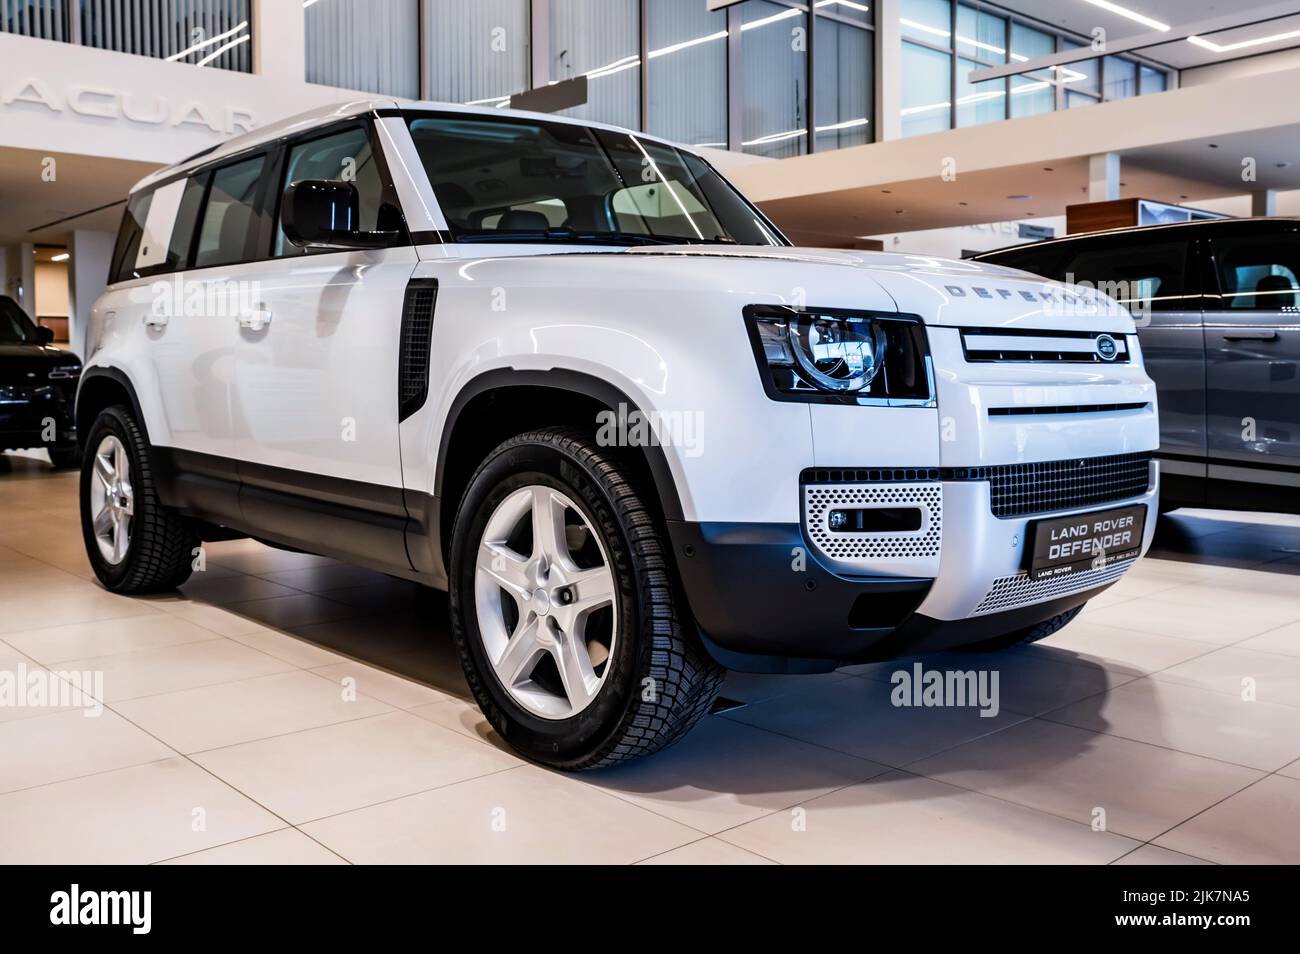 ROSTOV-ON-DON, RUSSIA - 7 DECEMBER 2020: Land Rover Defender, new popular model in dealer centre, front side view. Selective focus Stock Photo